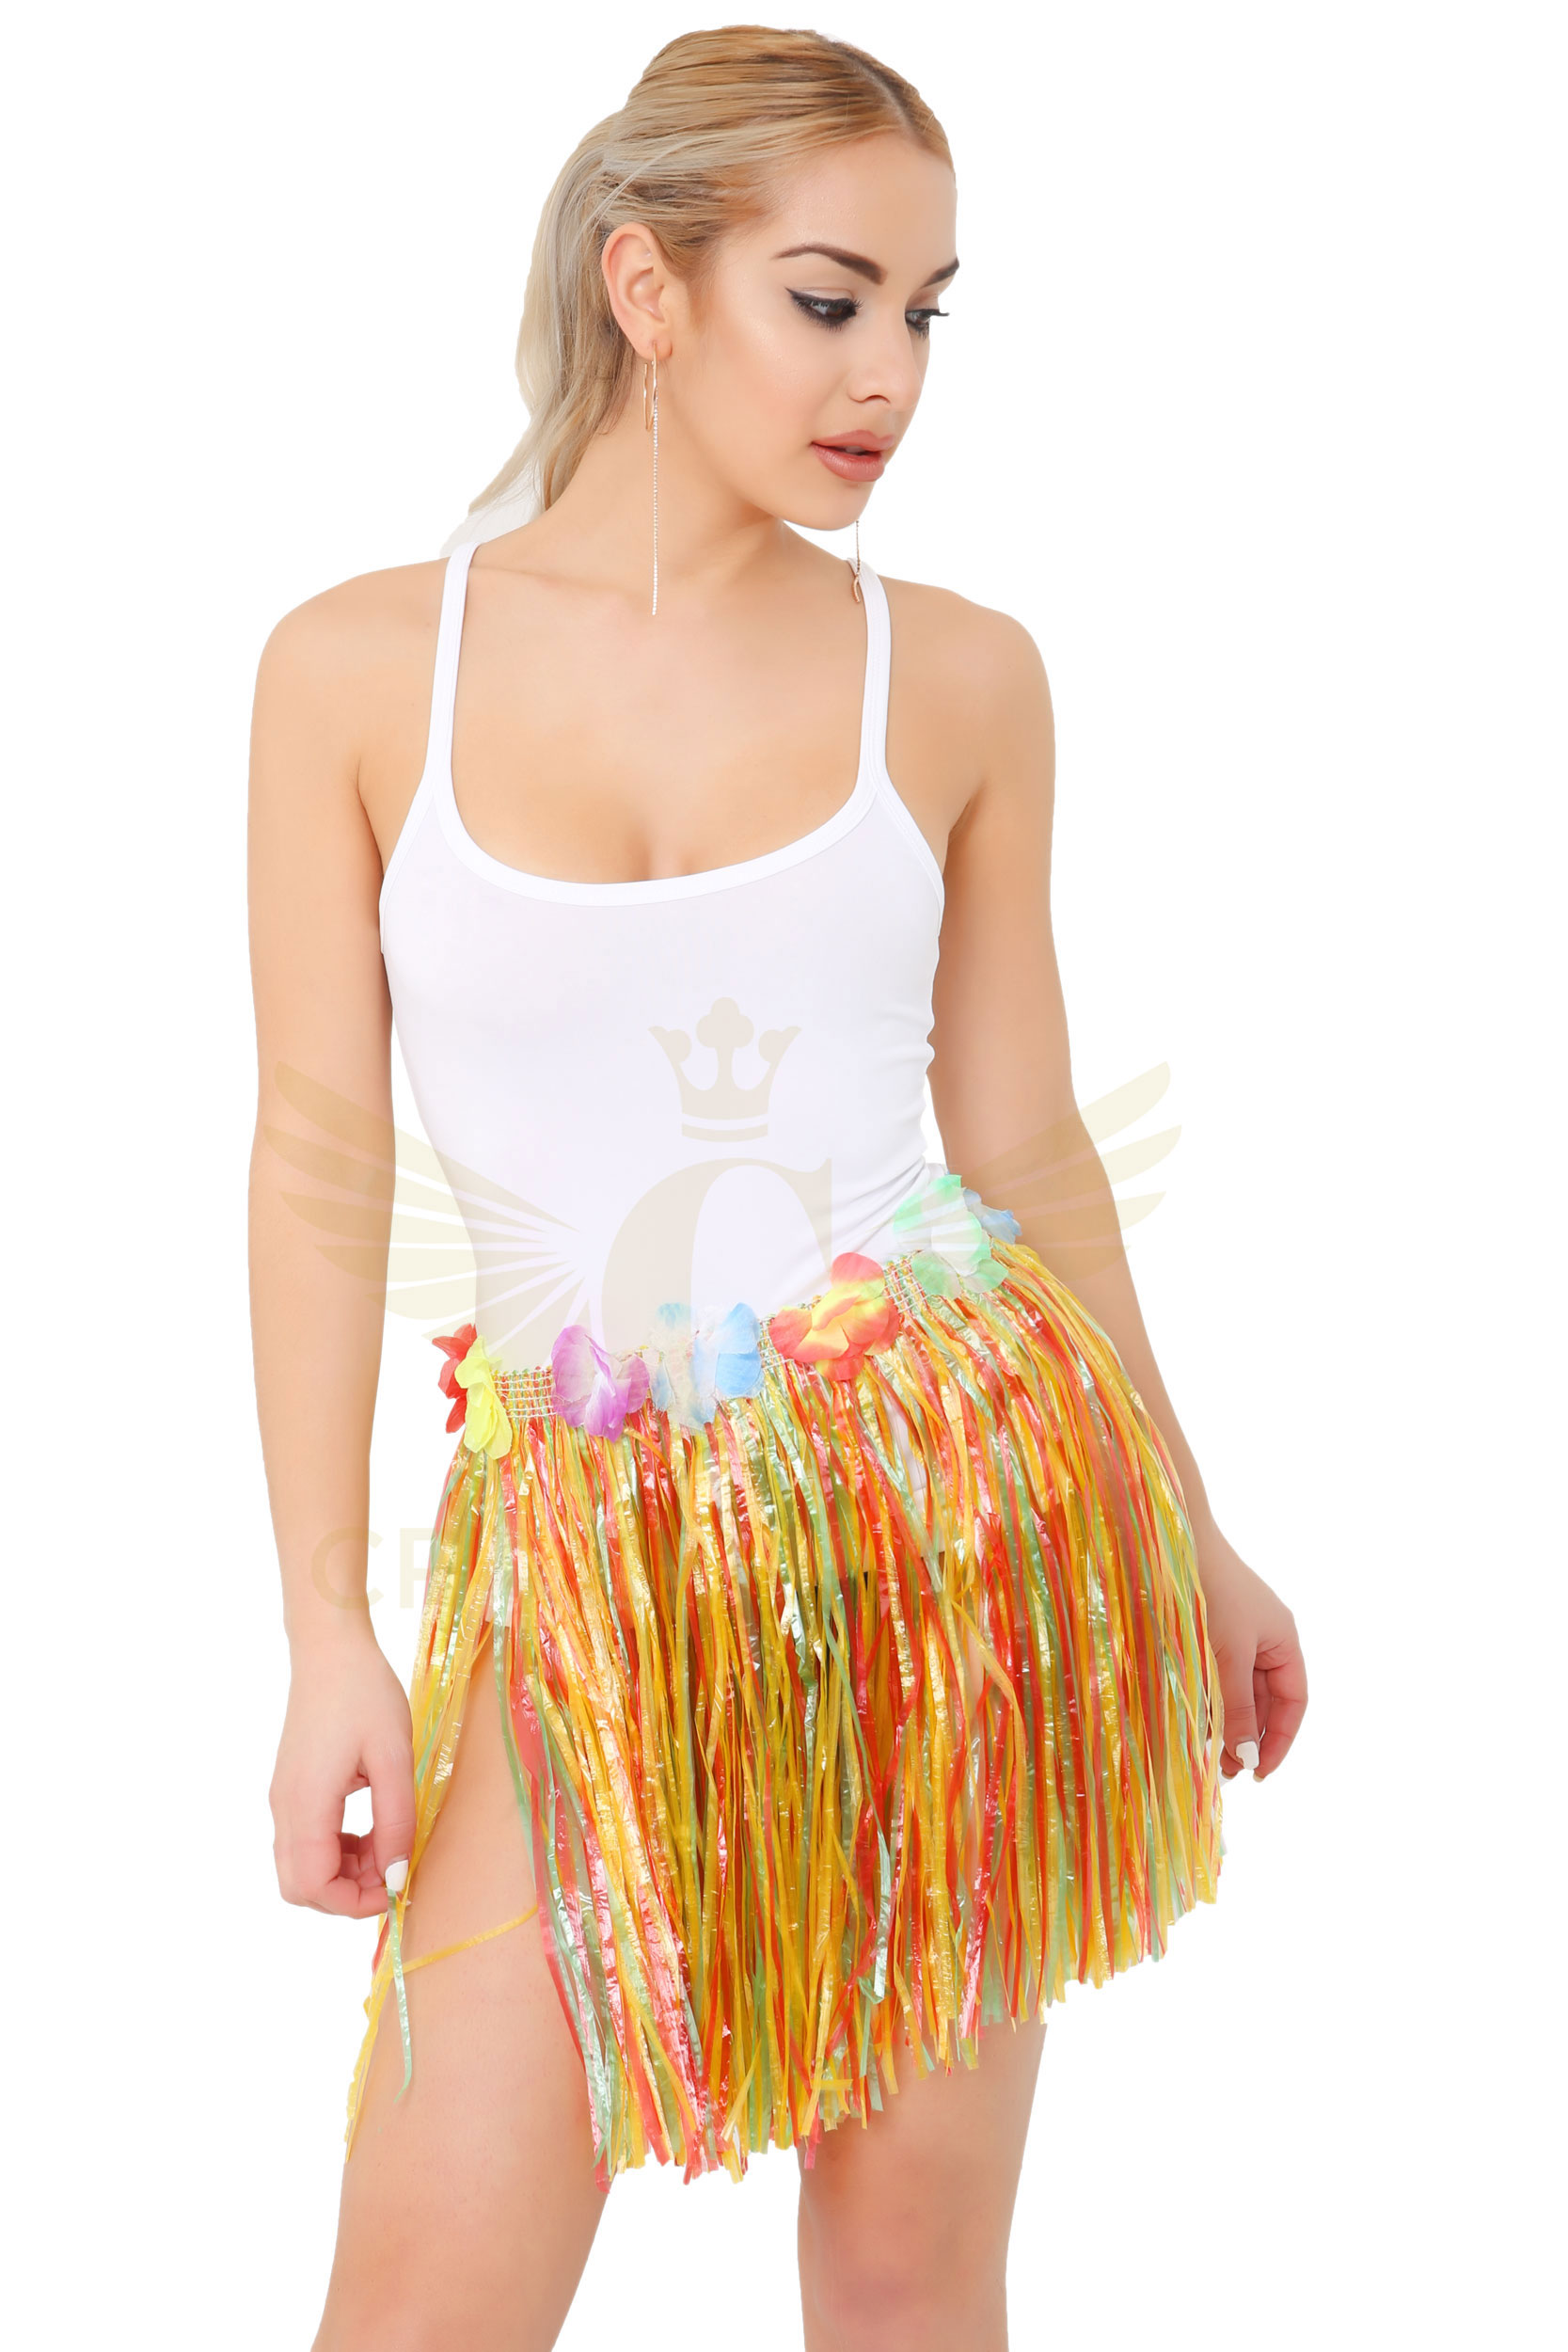 Crazy Chick Adult Multi Coloured Hula Skirt with Flowers (40cm)